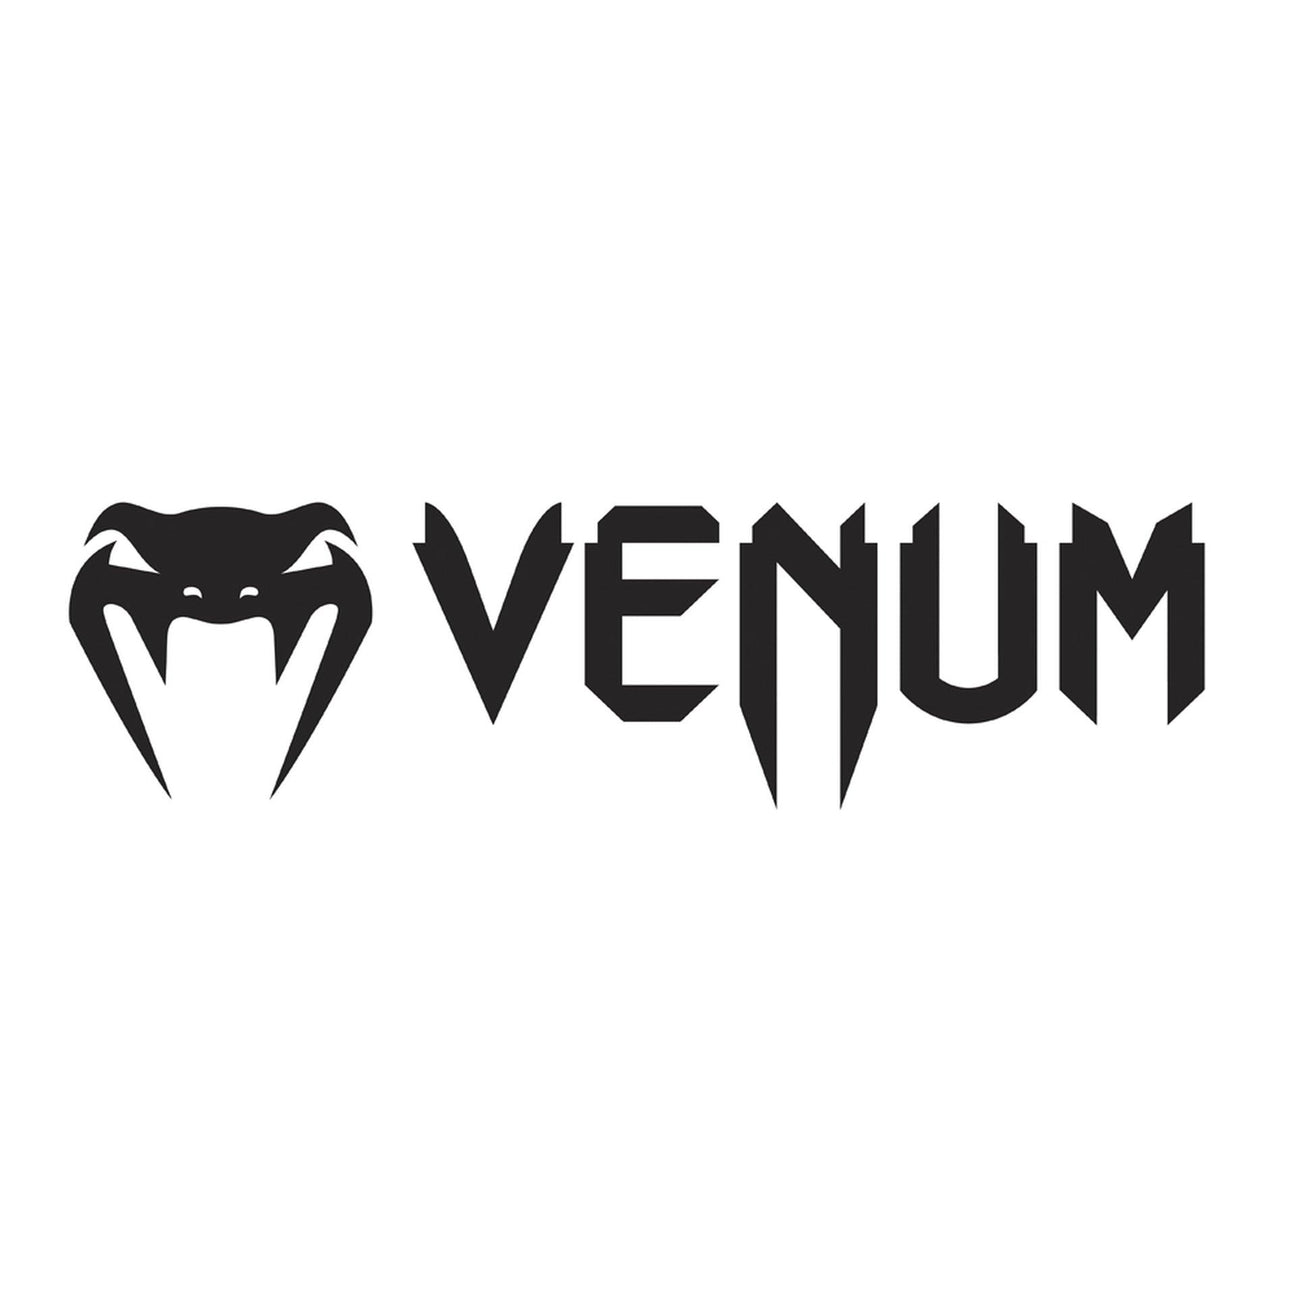 Venum Clothing, Boxing Gloves, & Combat Equipment - Made4Fighters